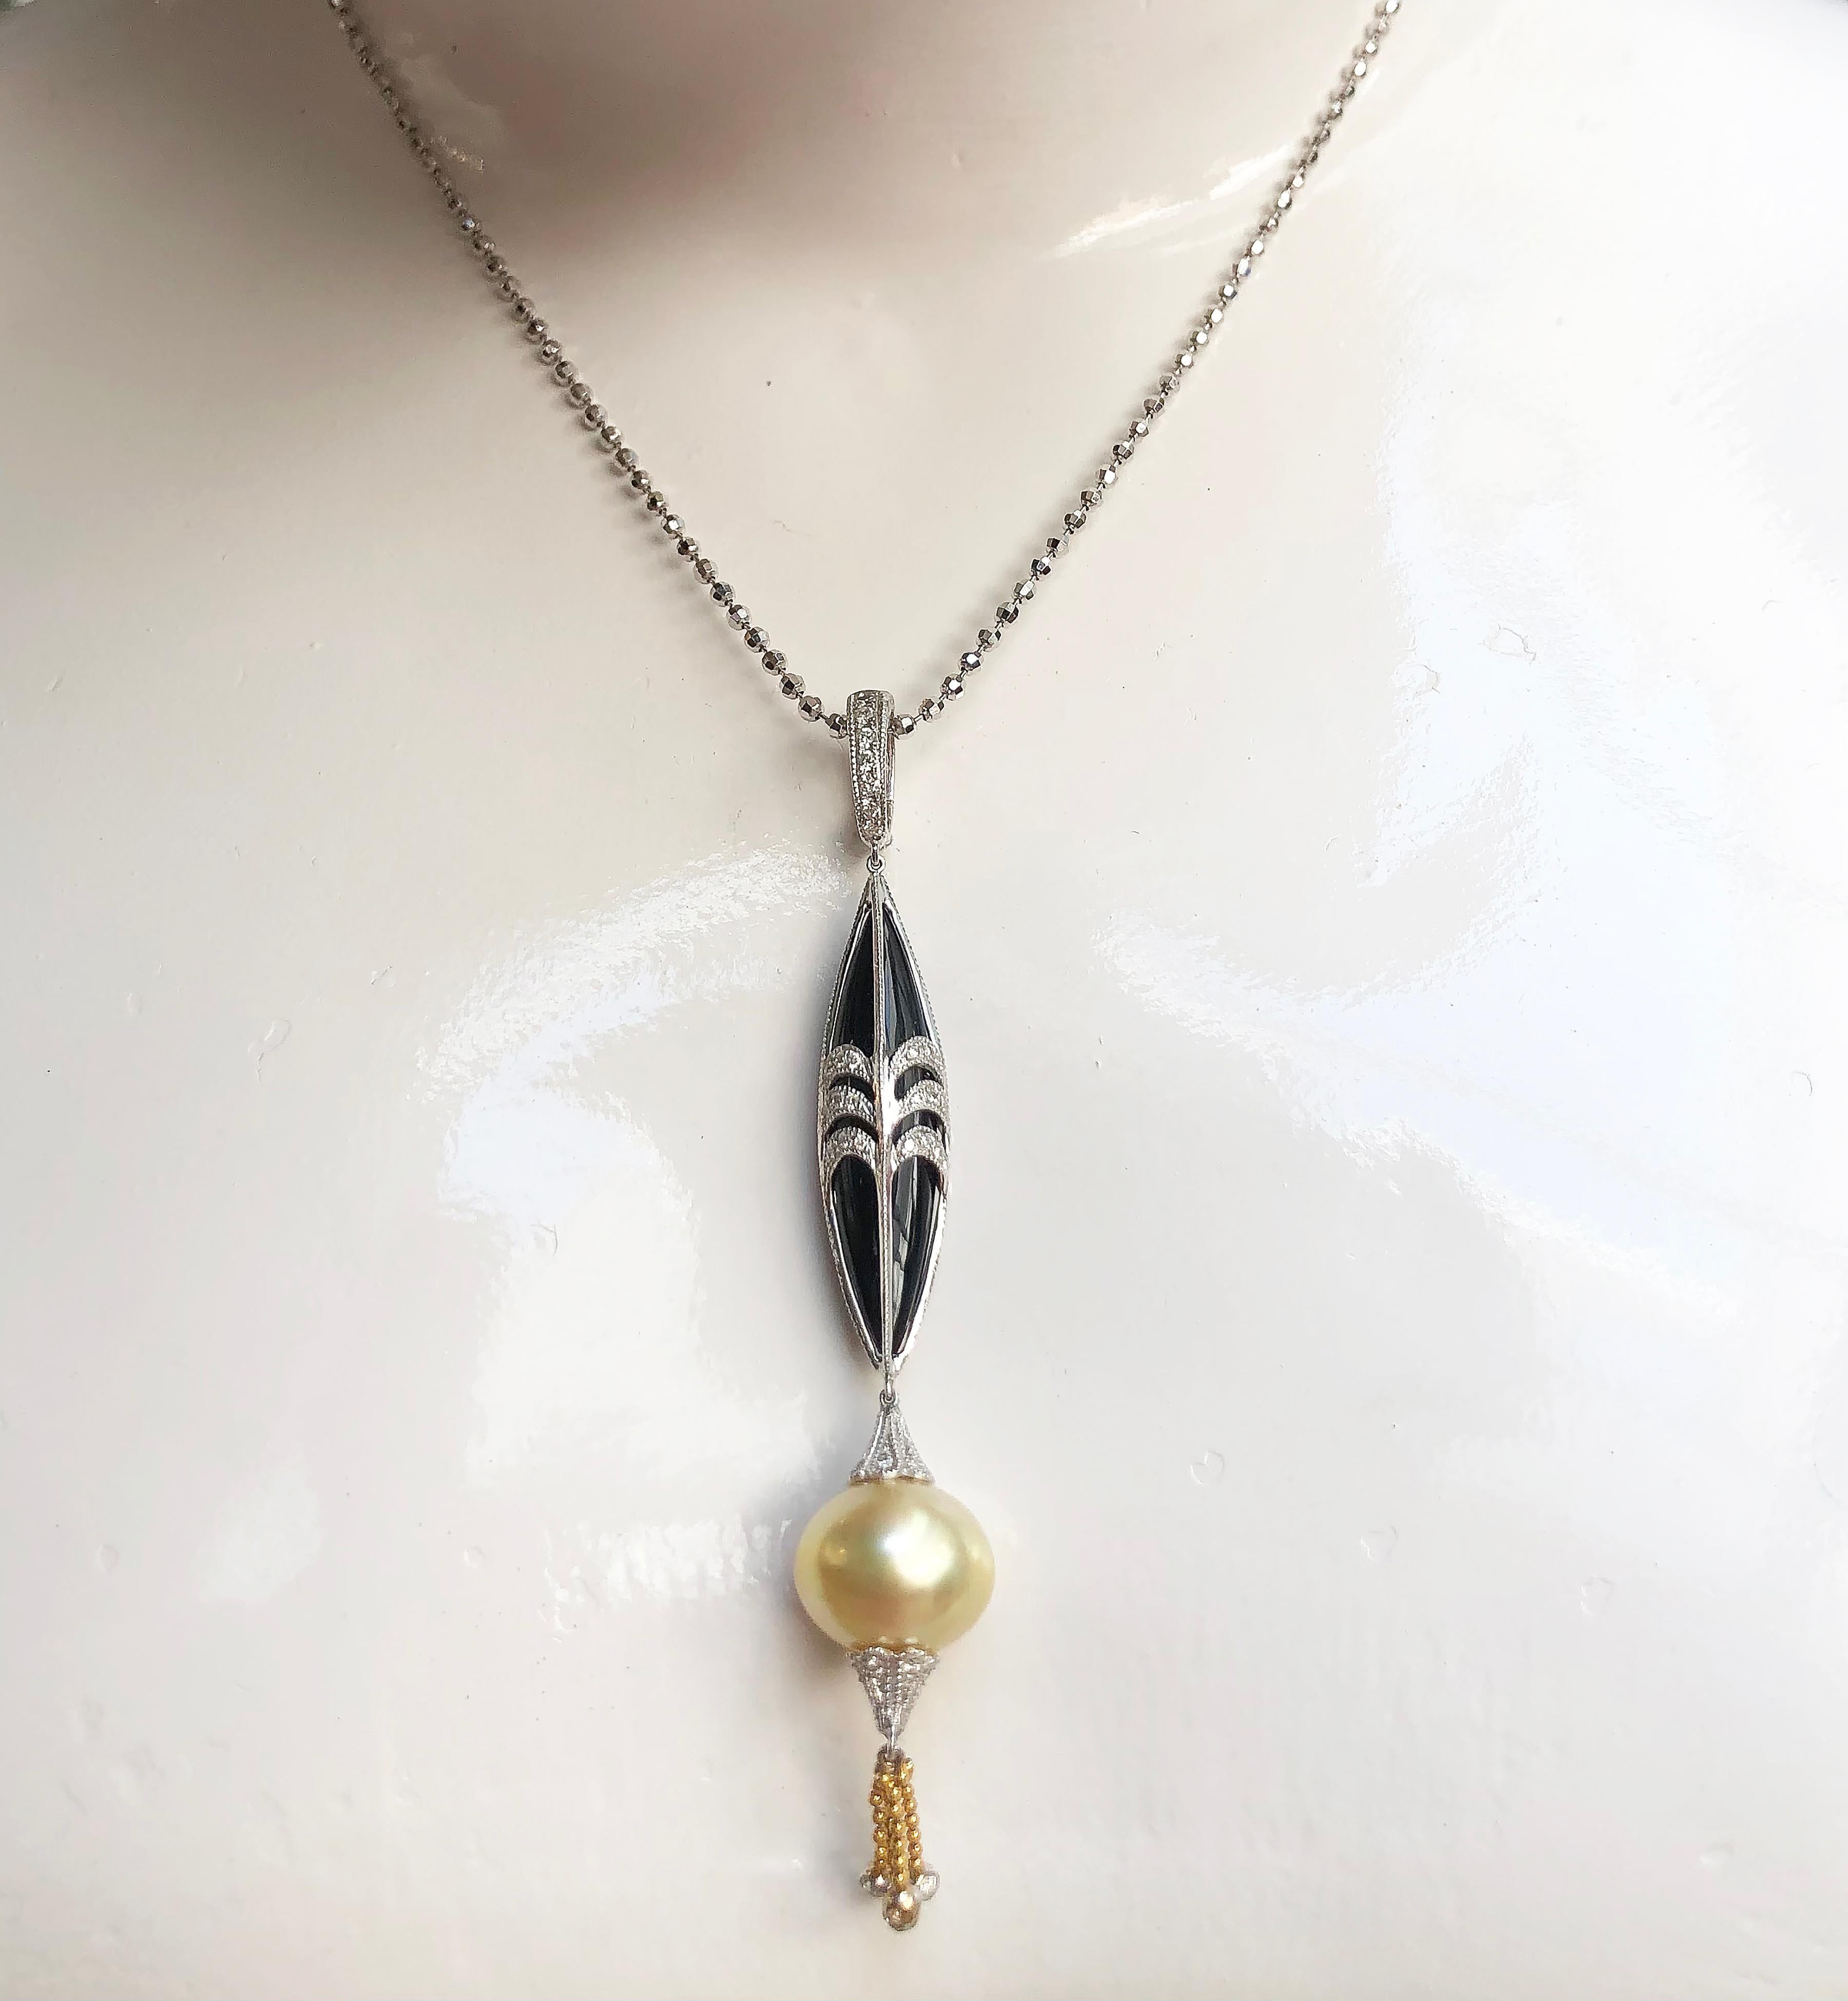 South Sea Pearl with Diamond 0.35 carats and Onyx 1.34 carats Pendant set in 18 Karat White Gold Settings
(chain not included)

Width: 1.3 cm
Length: 8.8 cm 

